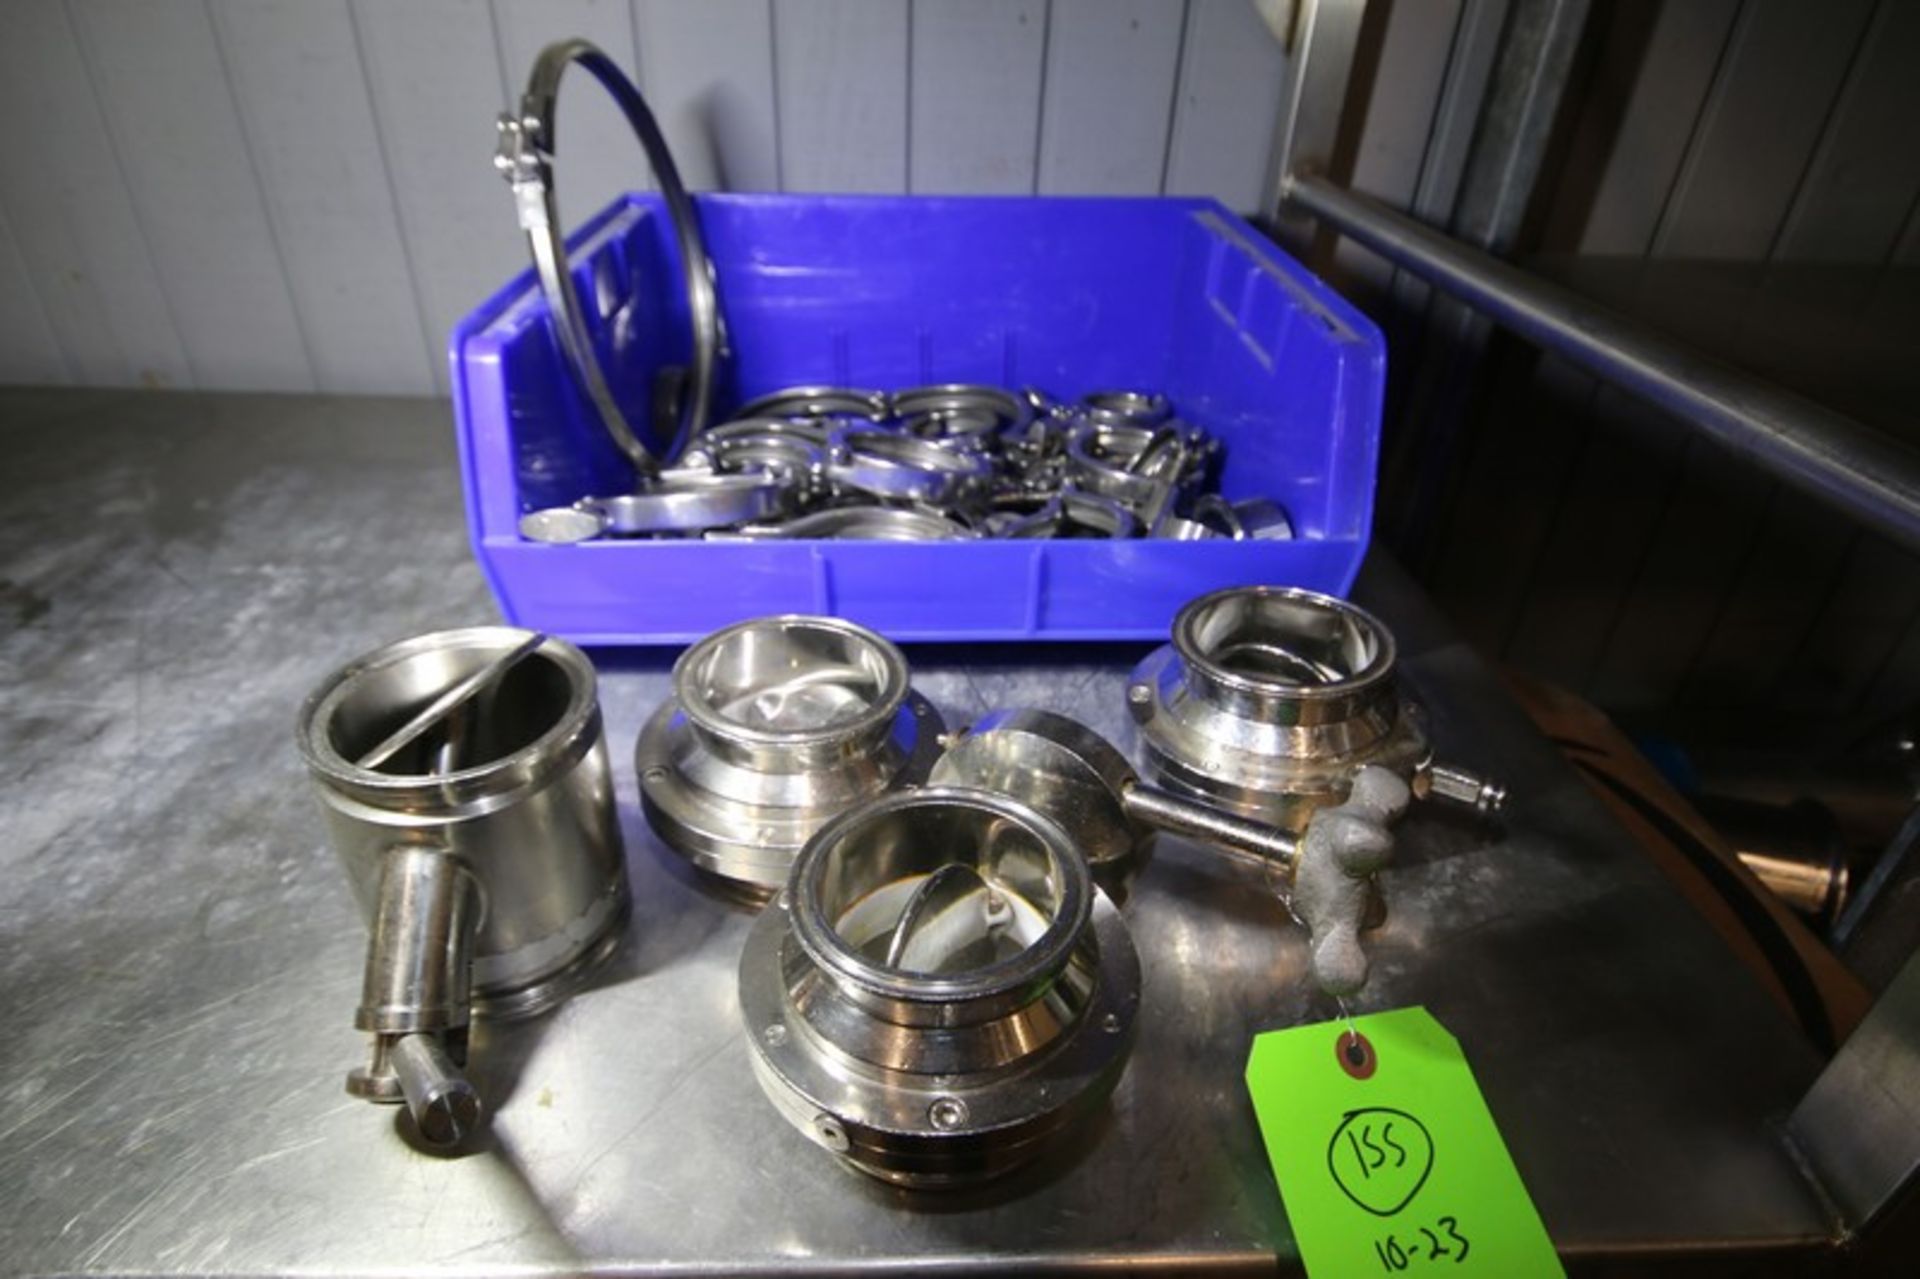 Lot of Assorted S/S Valves & Clamps Including (4) 3" Butterfly Valves & Box of 1" to 4" Assorted S/S